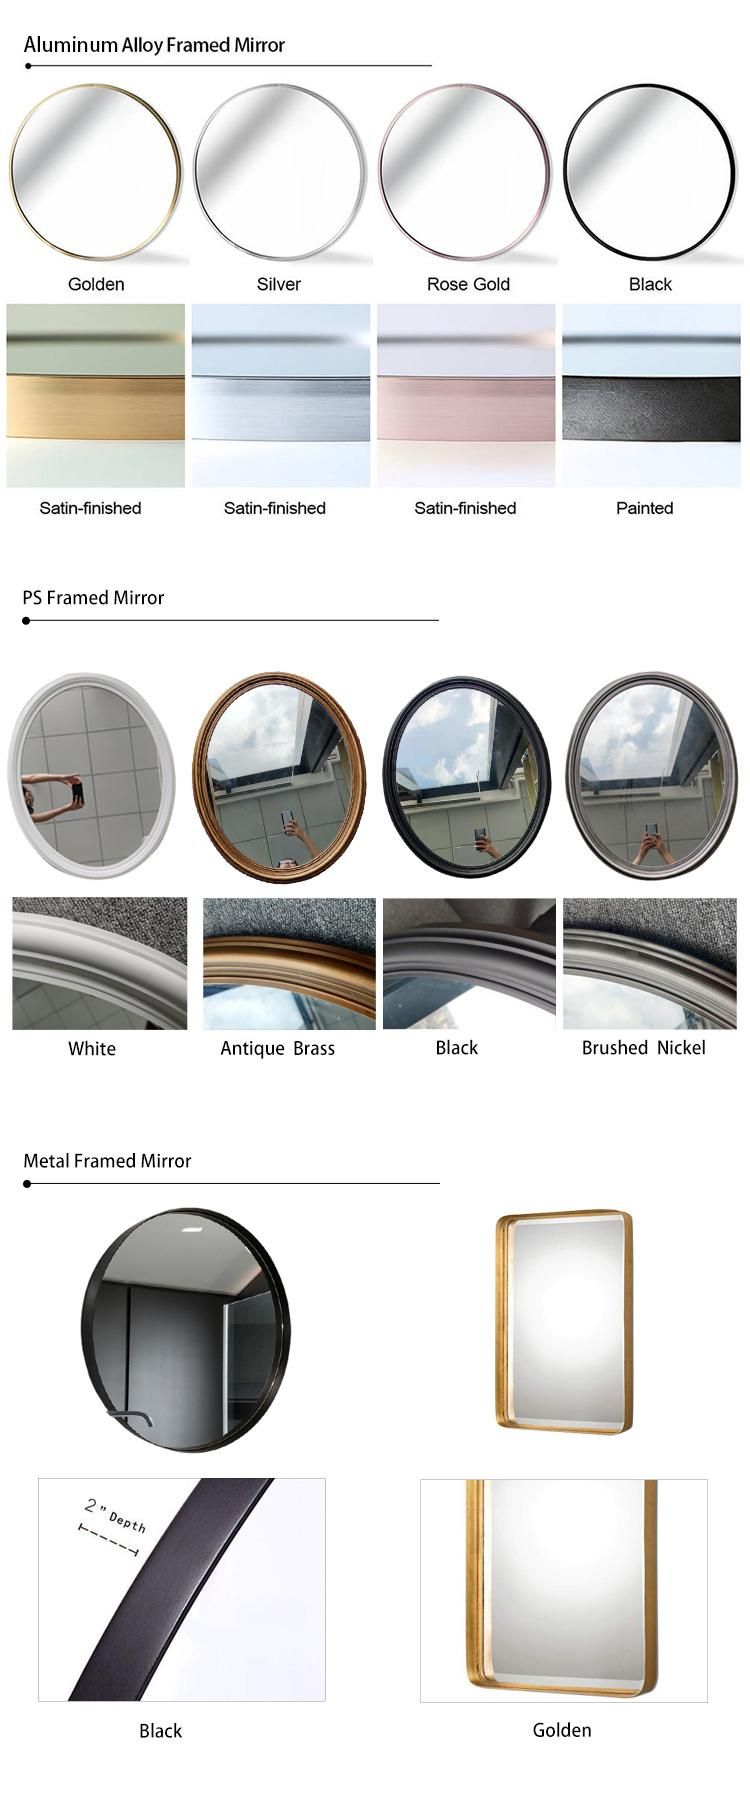 Jinghu Concise Style Home Decorative Bathroom Living Room Iron Metal Frame Mirror Wall Mounted Furniture Mirror